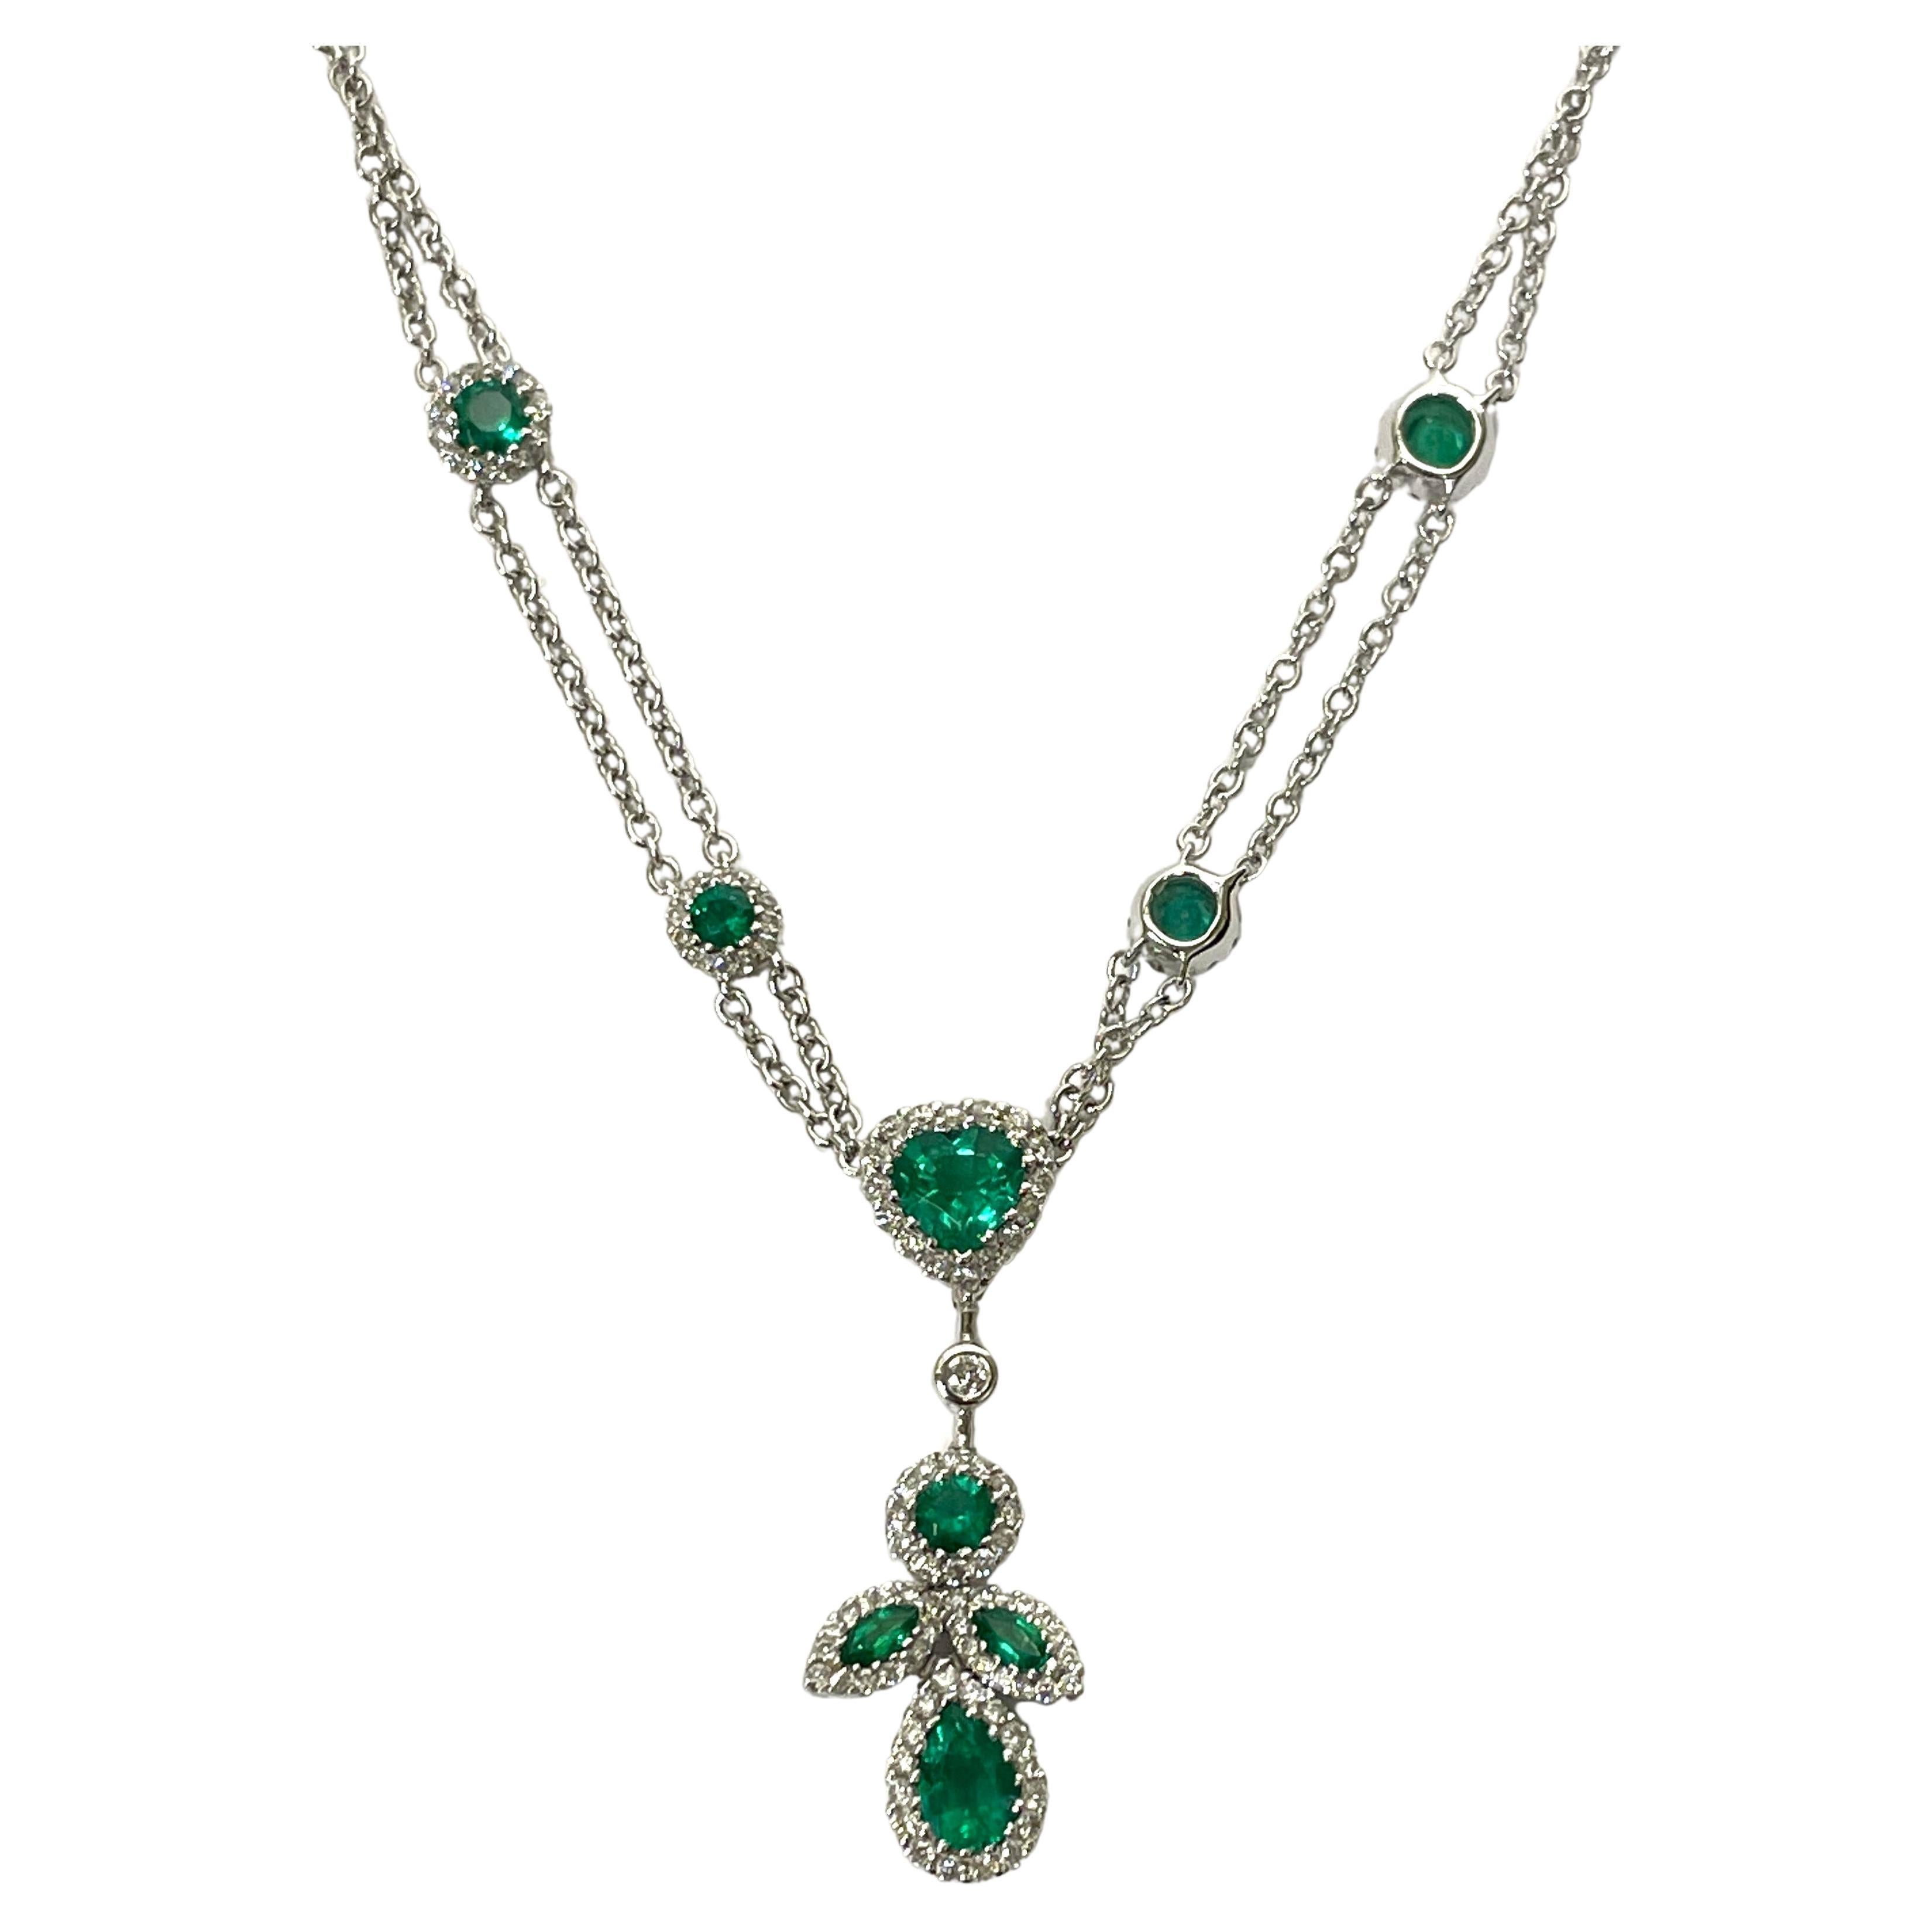 By New York designer Gregg Ruth, this stunning emerald and diamond necklace is sure to grab attention!  Absolute beauty!
18 karat white gold double cable chain.
Four round emeralds with halos of diamonds adorn the necklace chain.
An emerald heart,